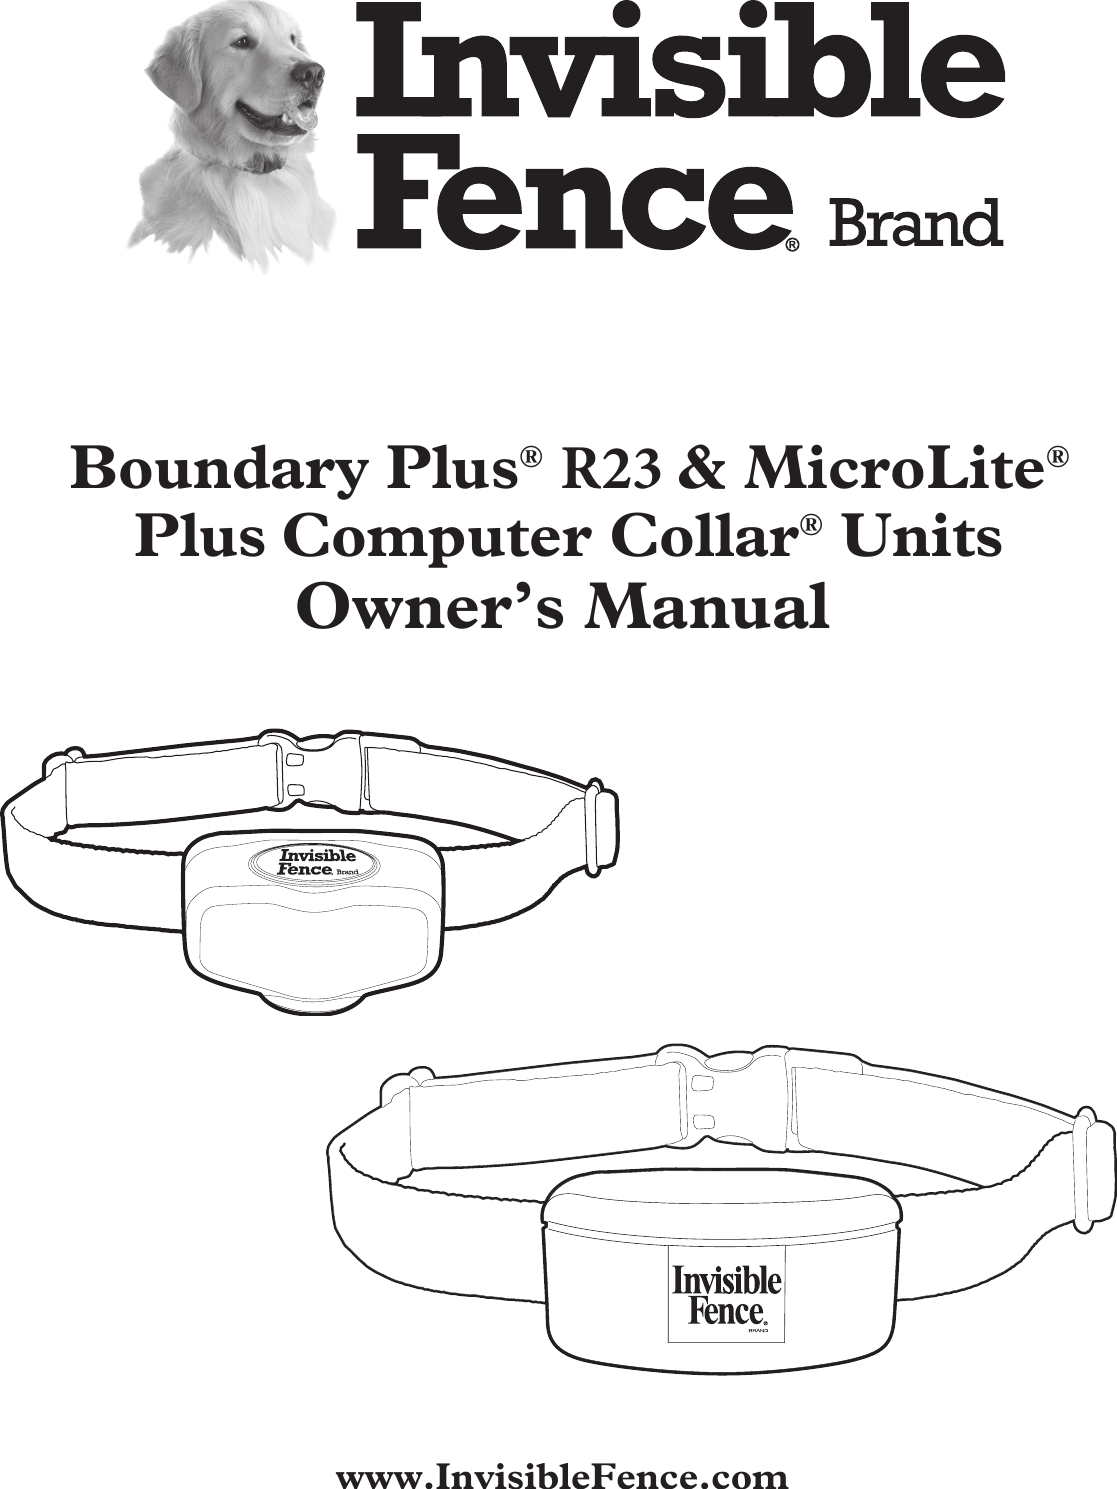 Boundary Plus® R23 &amp; MicroLite®Plus Computer Collar® Units Owner’s Manualwww.InvisibleFence.com